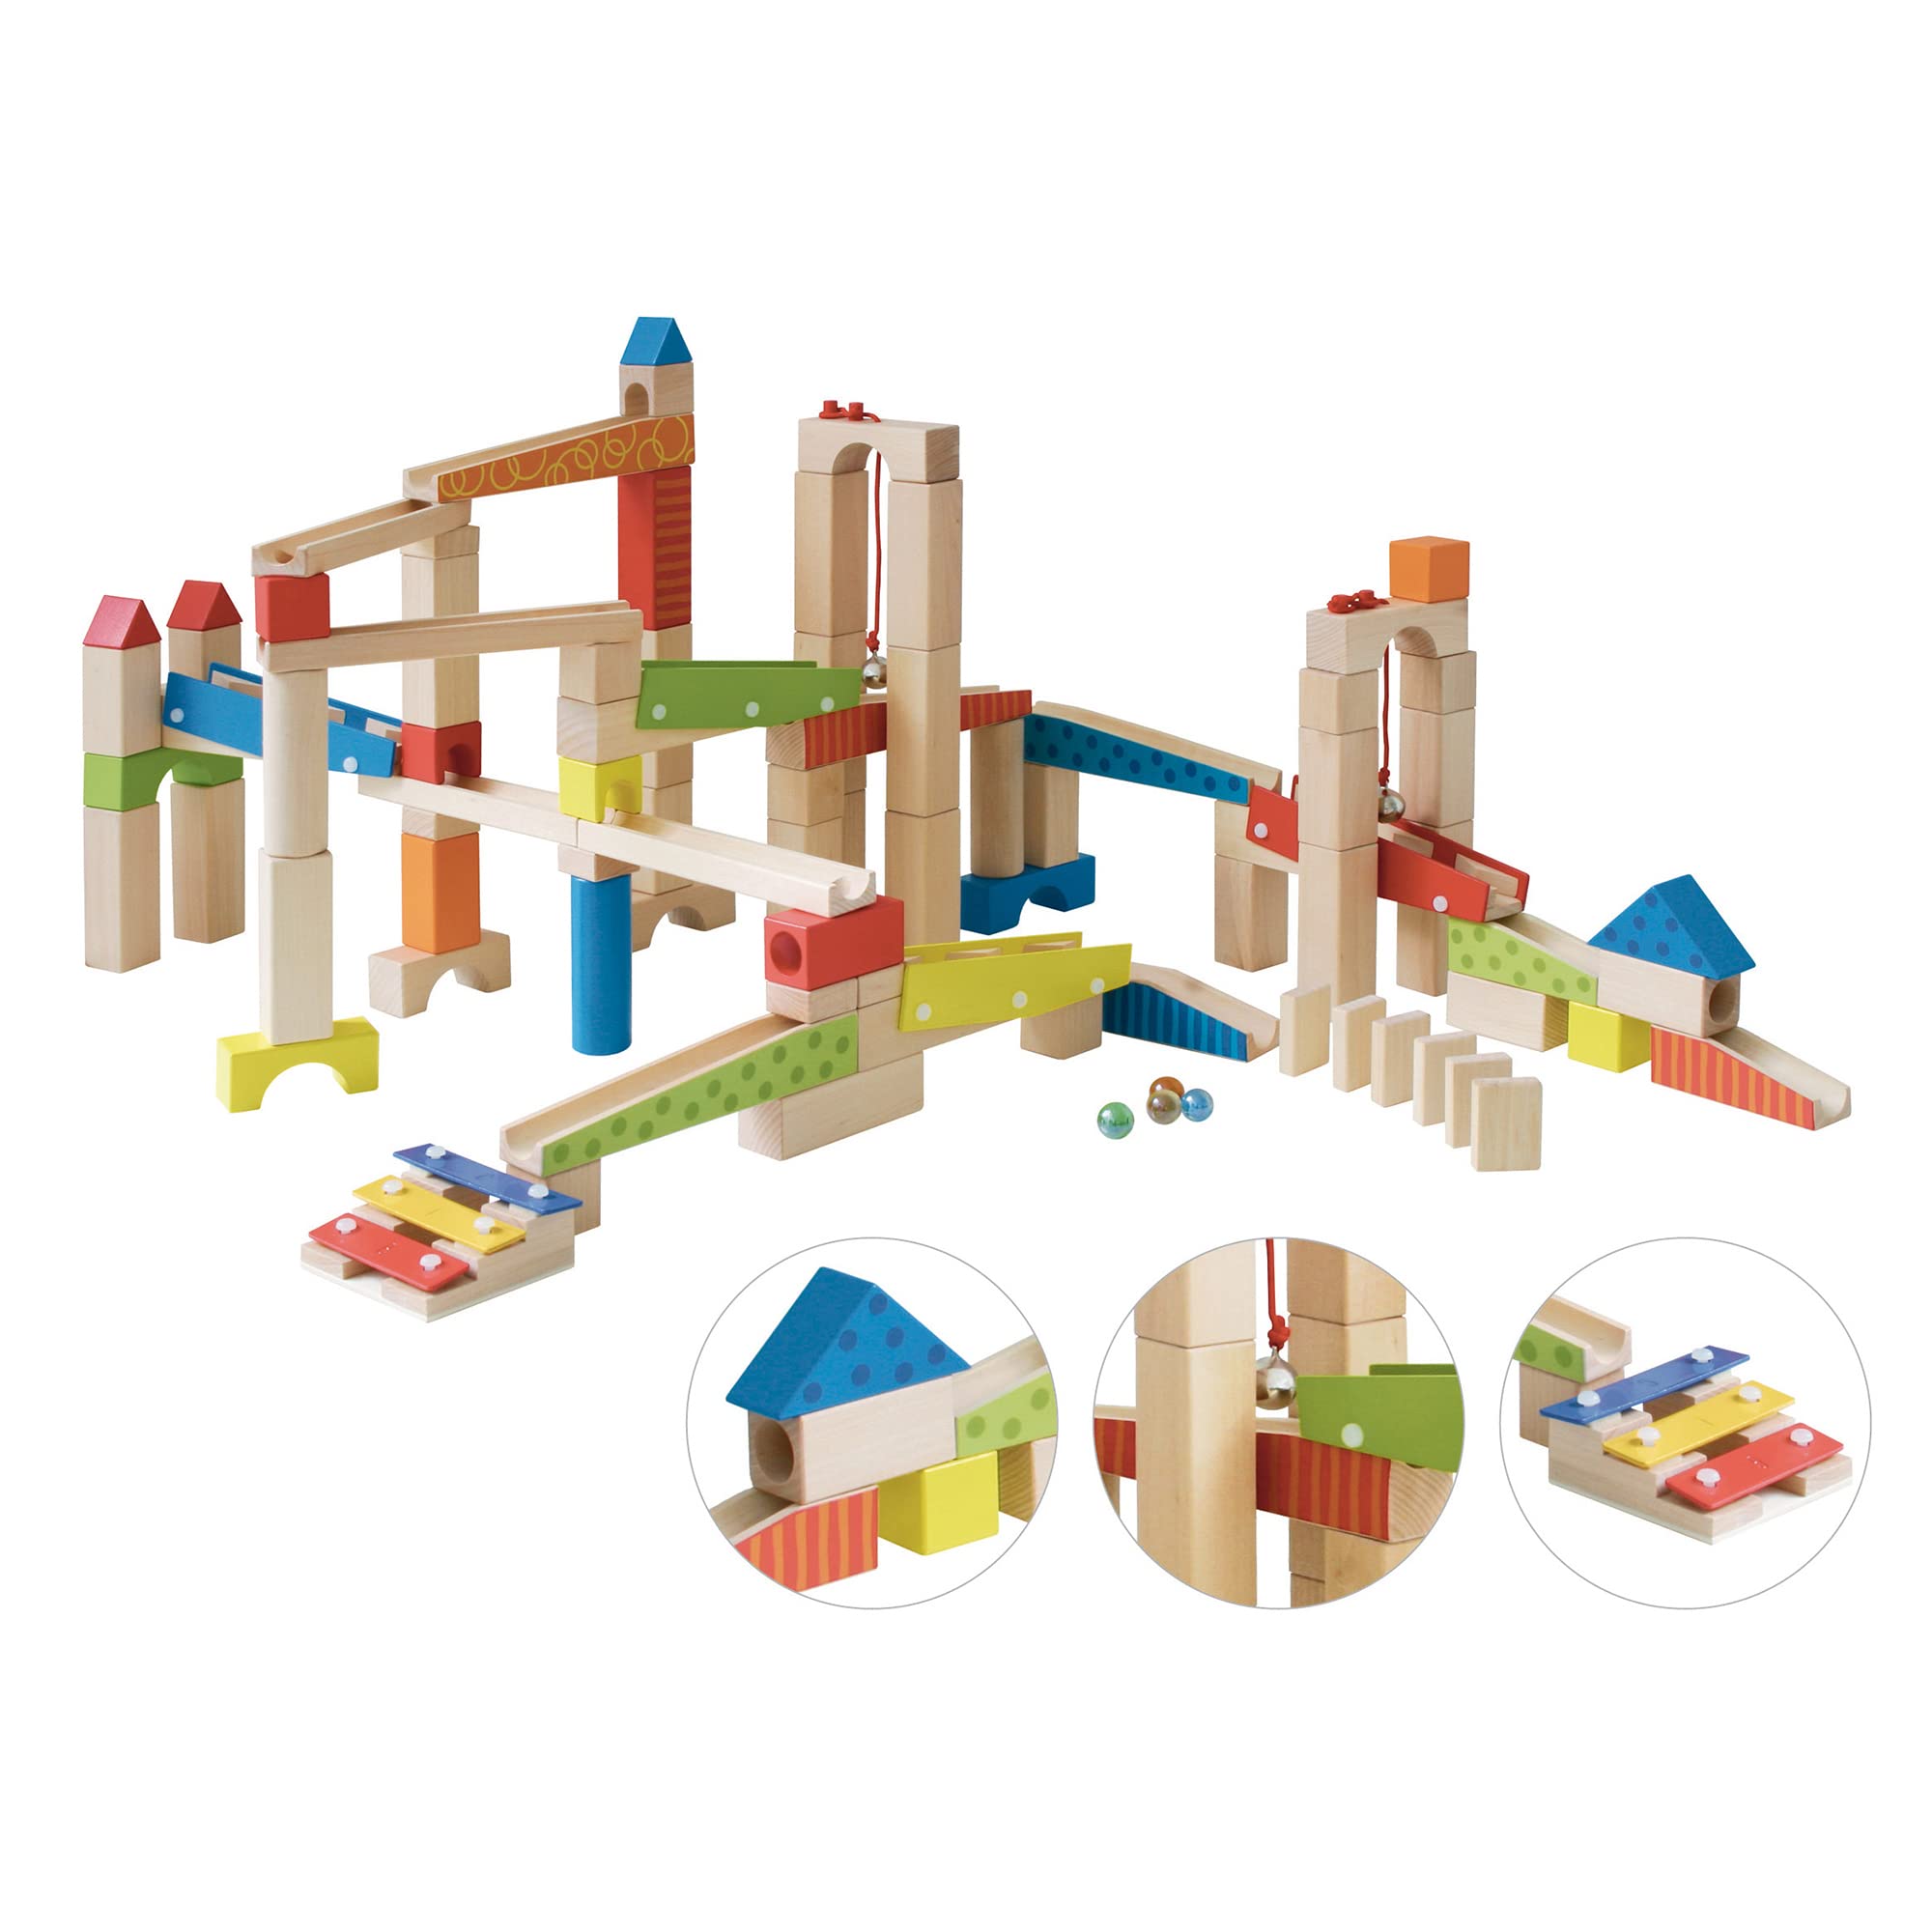 Roba Wooden Marble Run Set - 100 Pieces, 20 Glass Marbles & 80 Building Blocks, Ages 3+